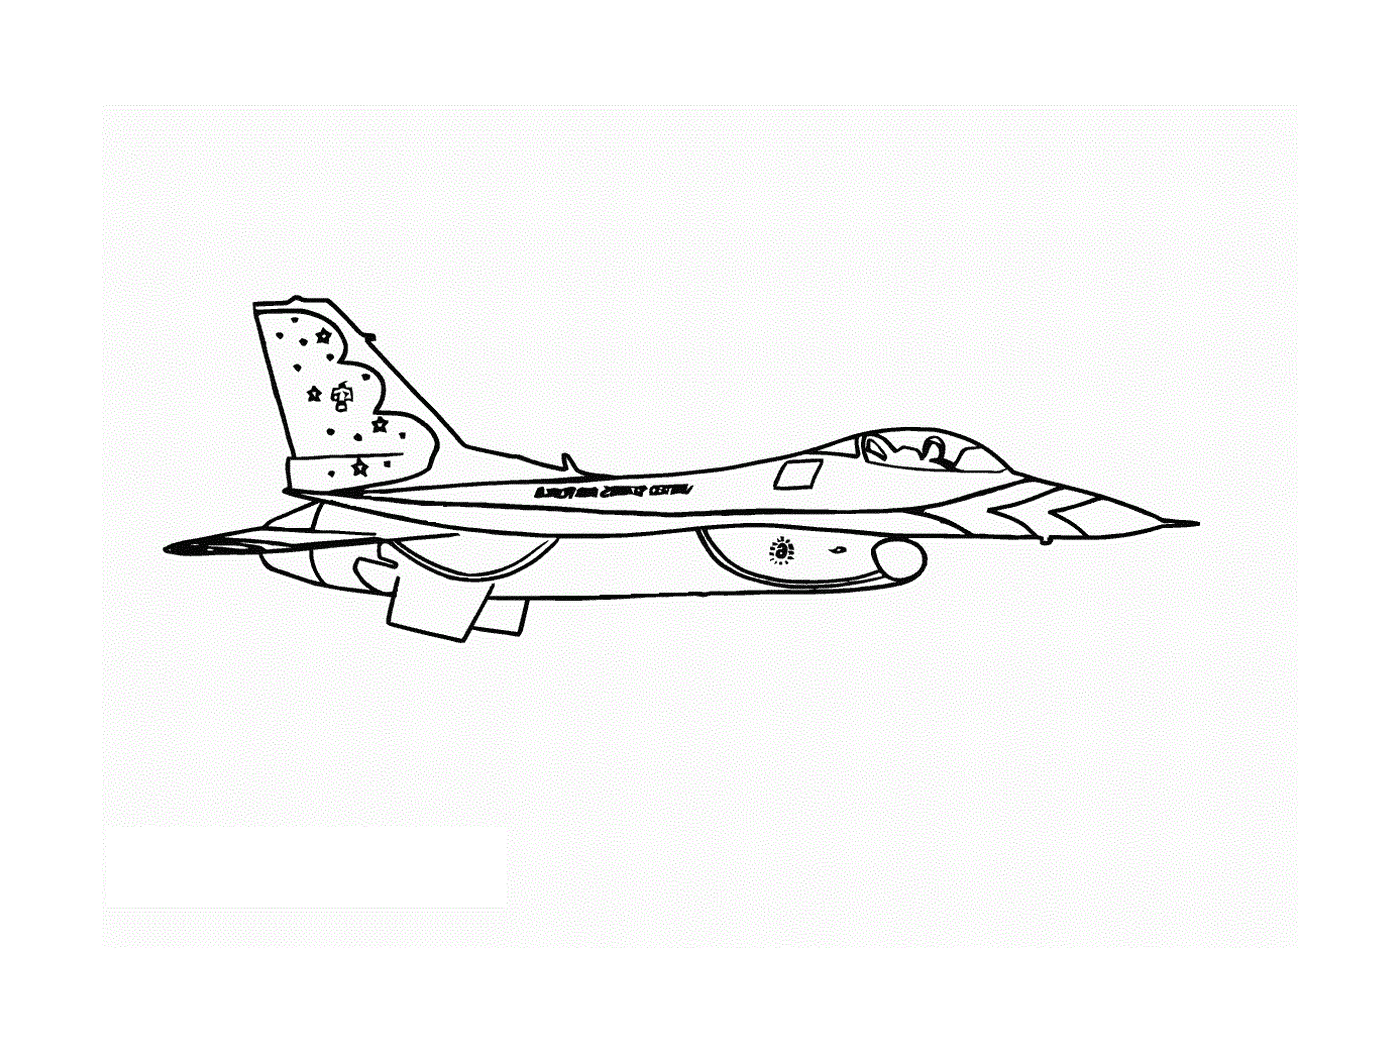  A fighter plane is drawn 